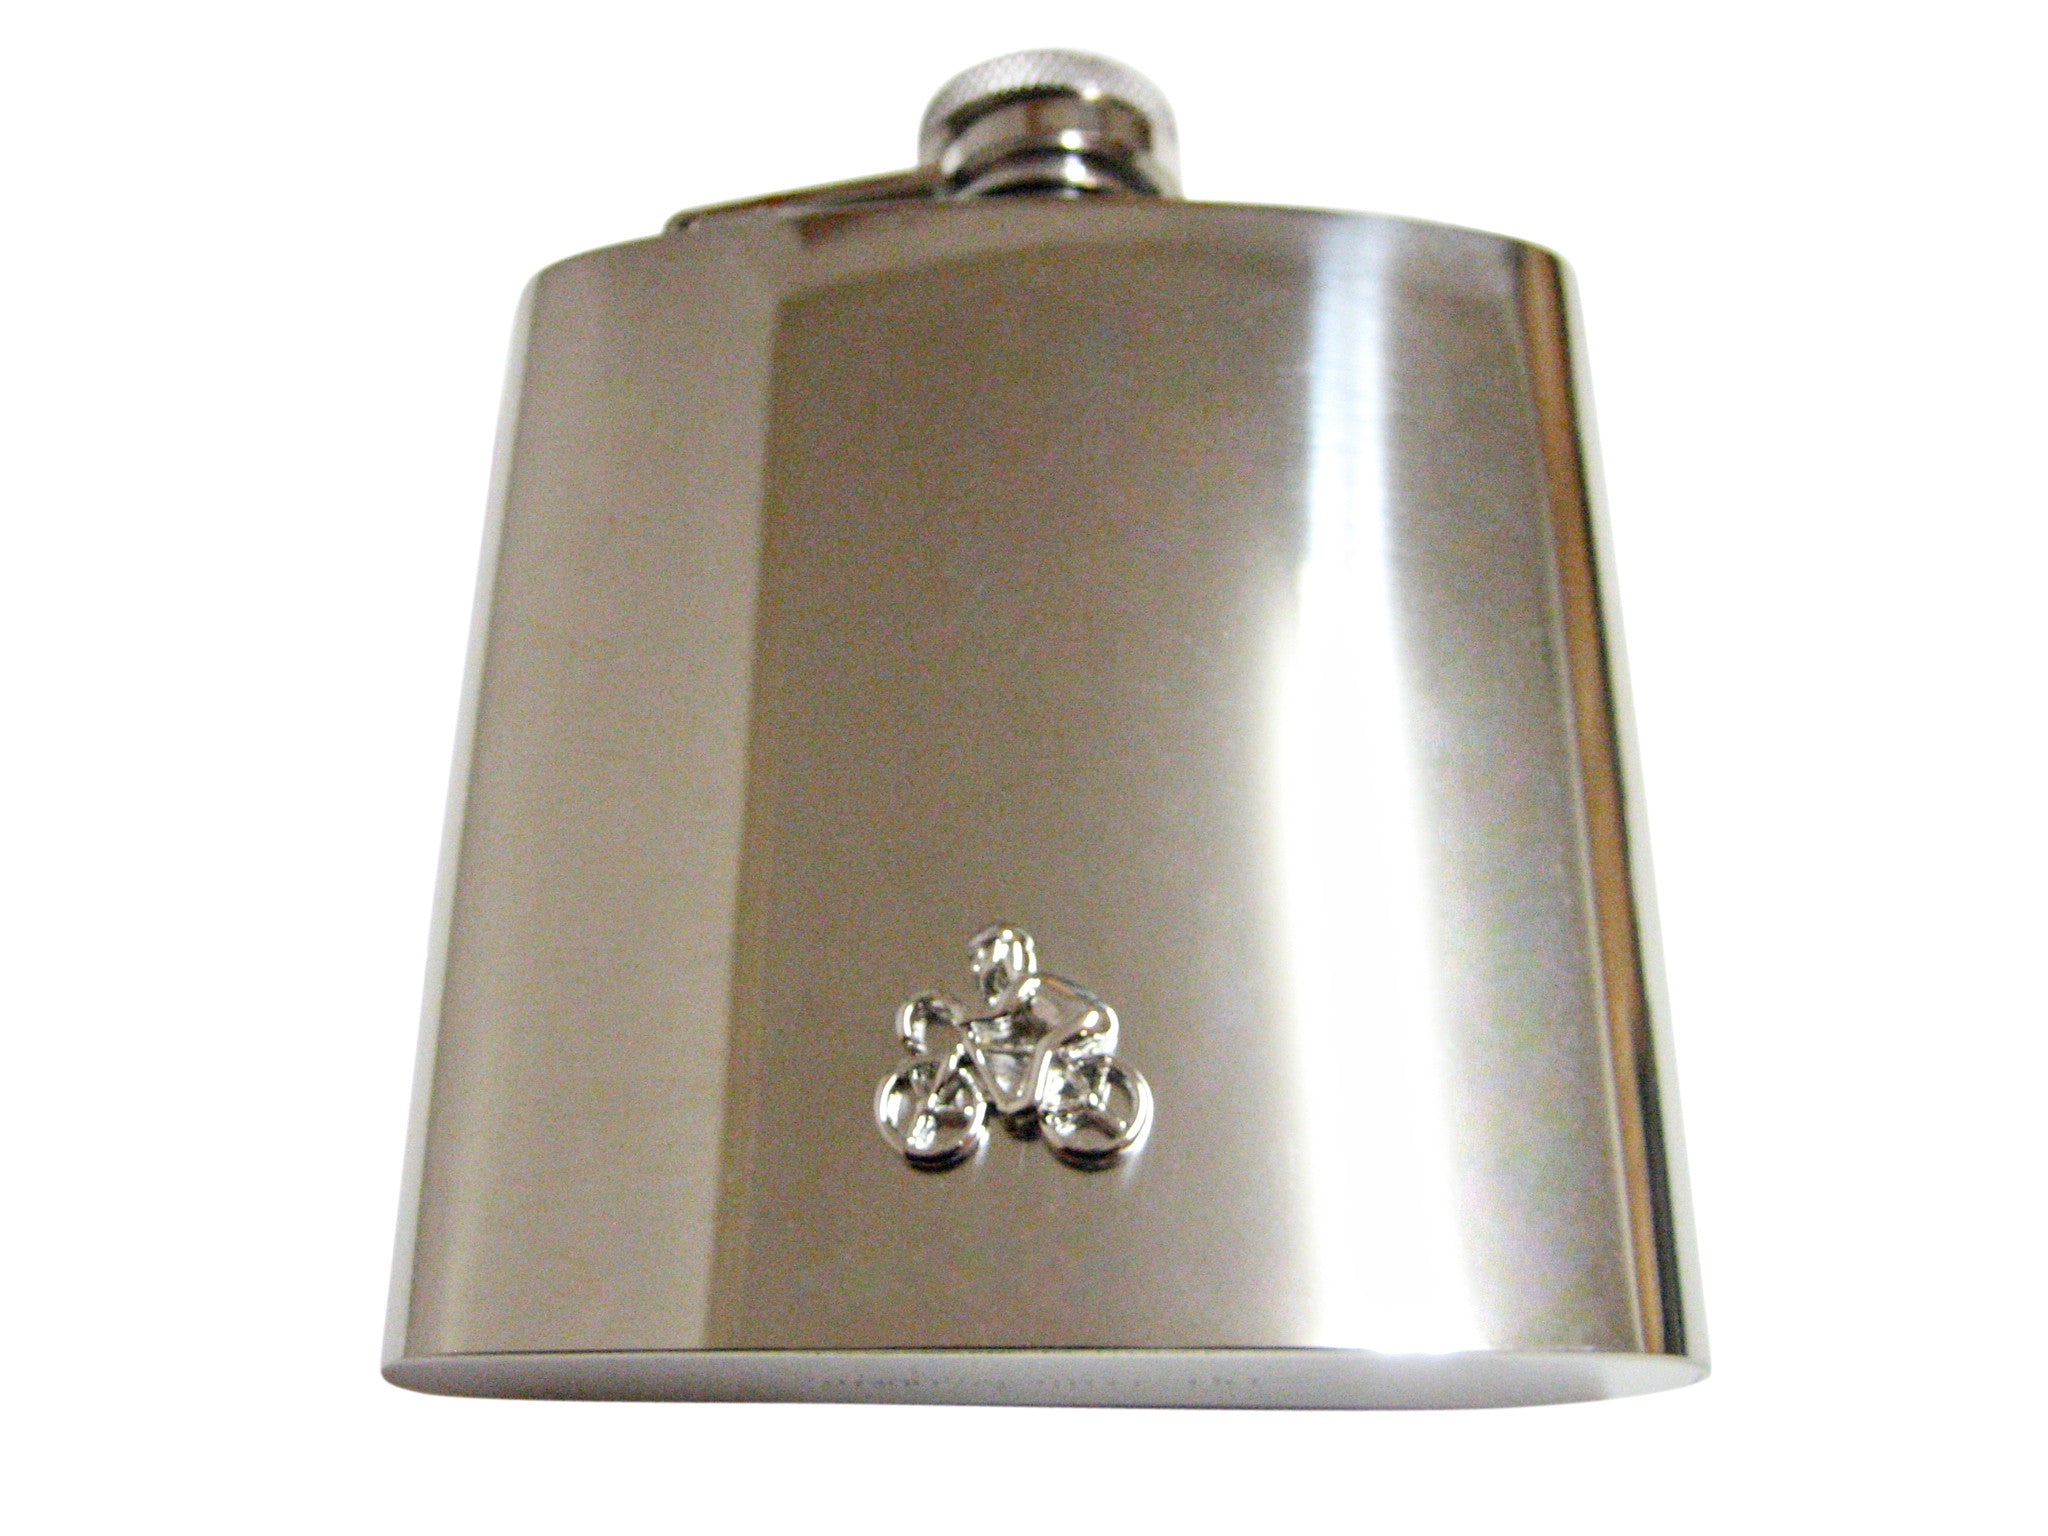 Silver Toned Bicyclist 6 Oz. Stainless Steel Flask